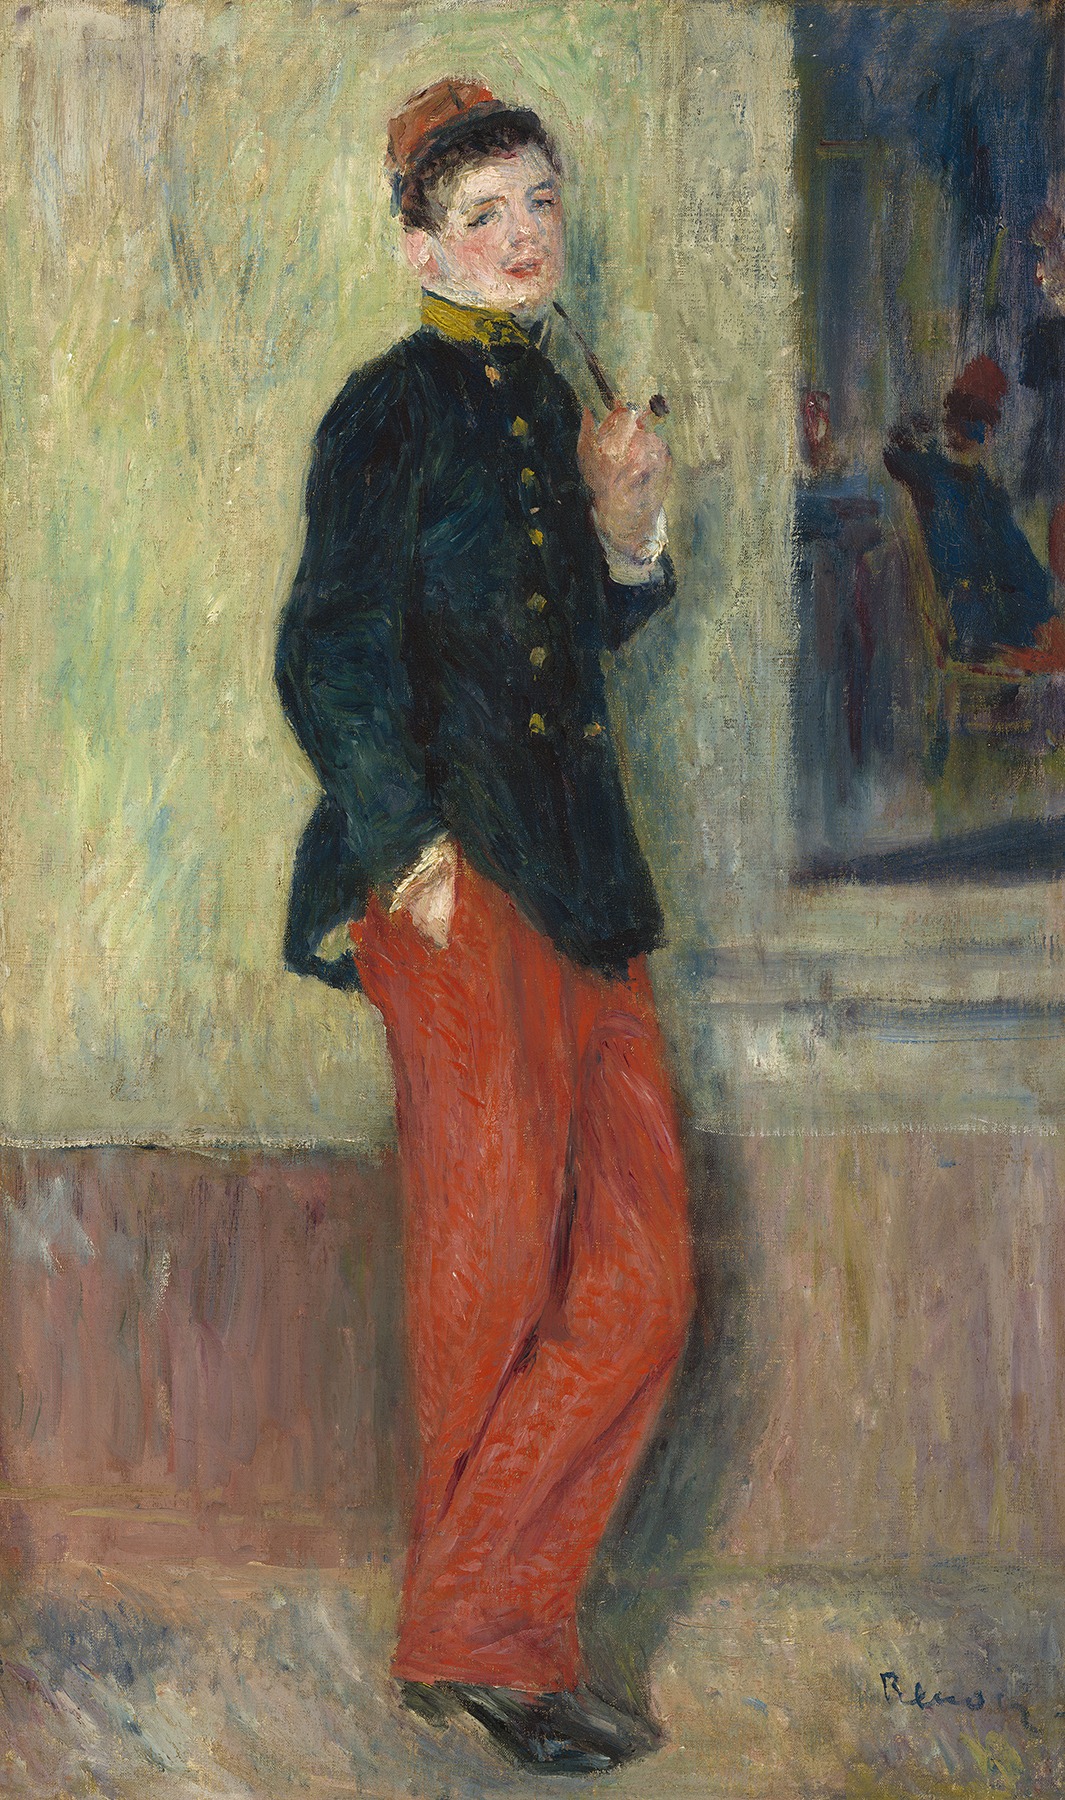 Painting of a boy in uniform propped against a wall with a pipe in his hand.